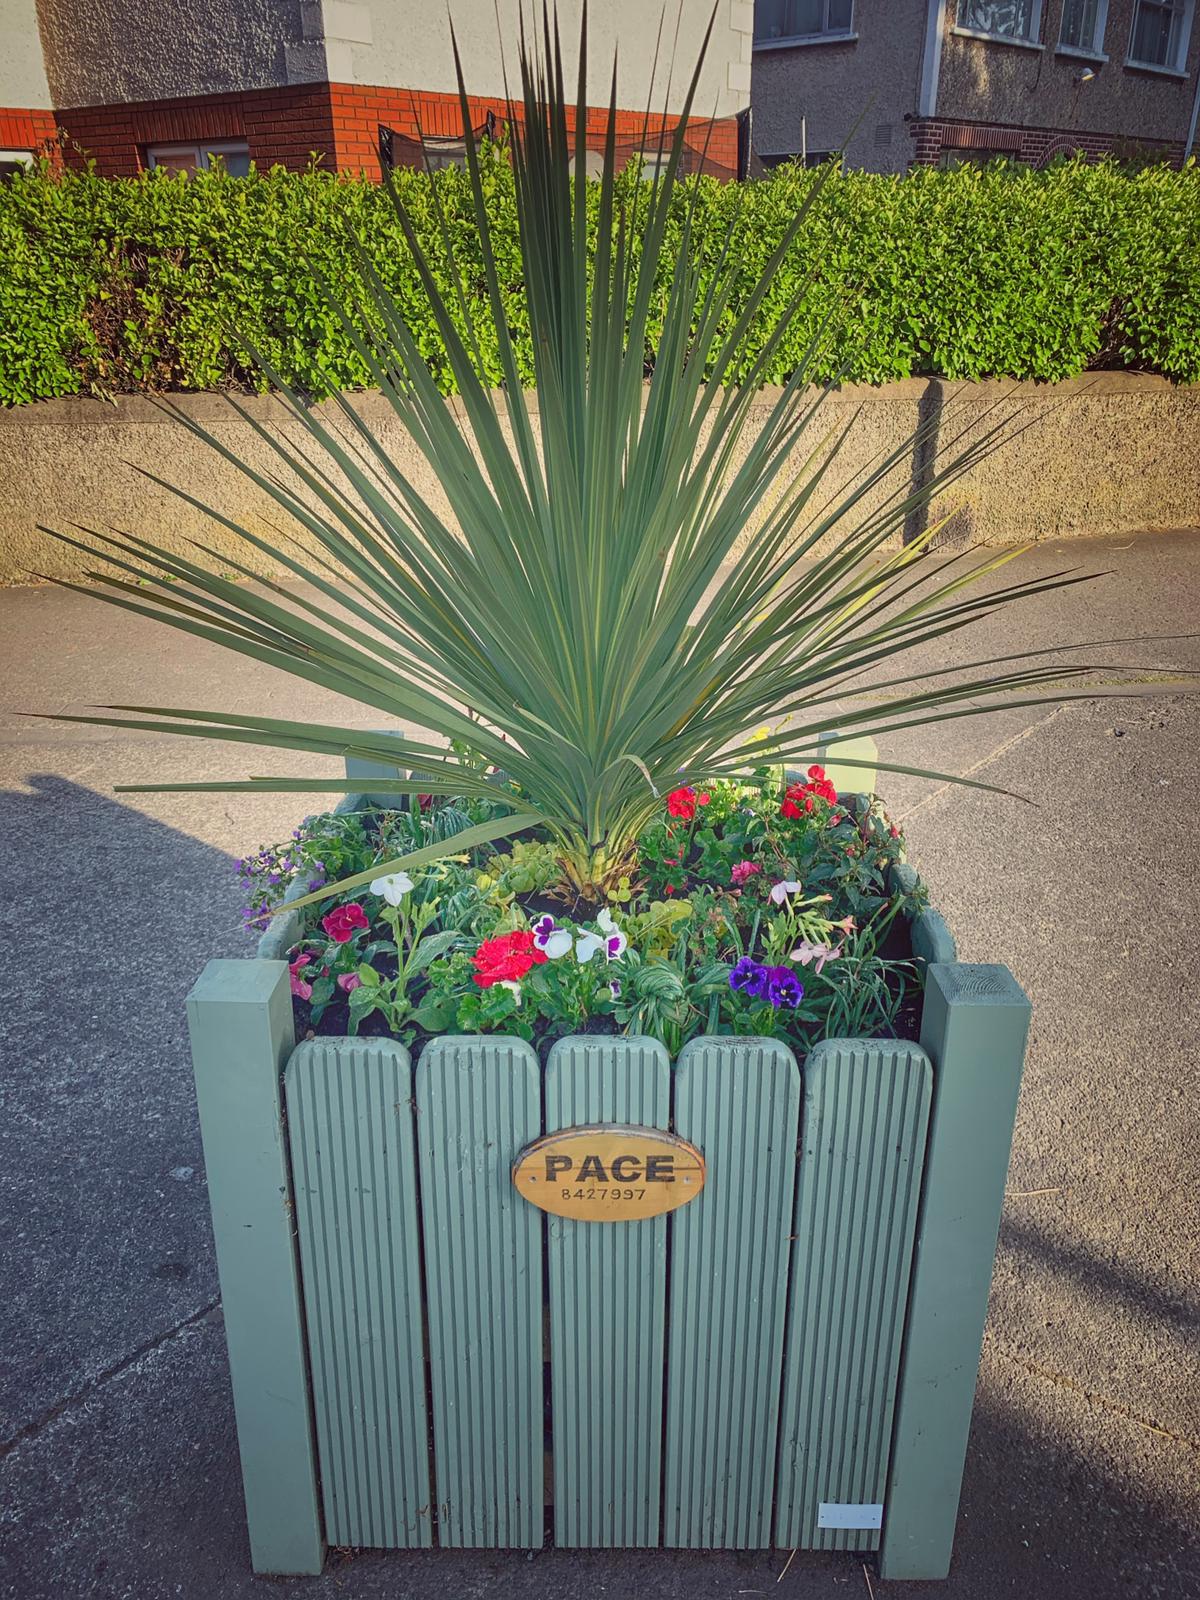 Planters - a little bit of colour to brighten your day